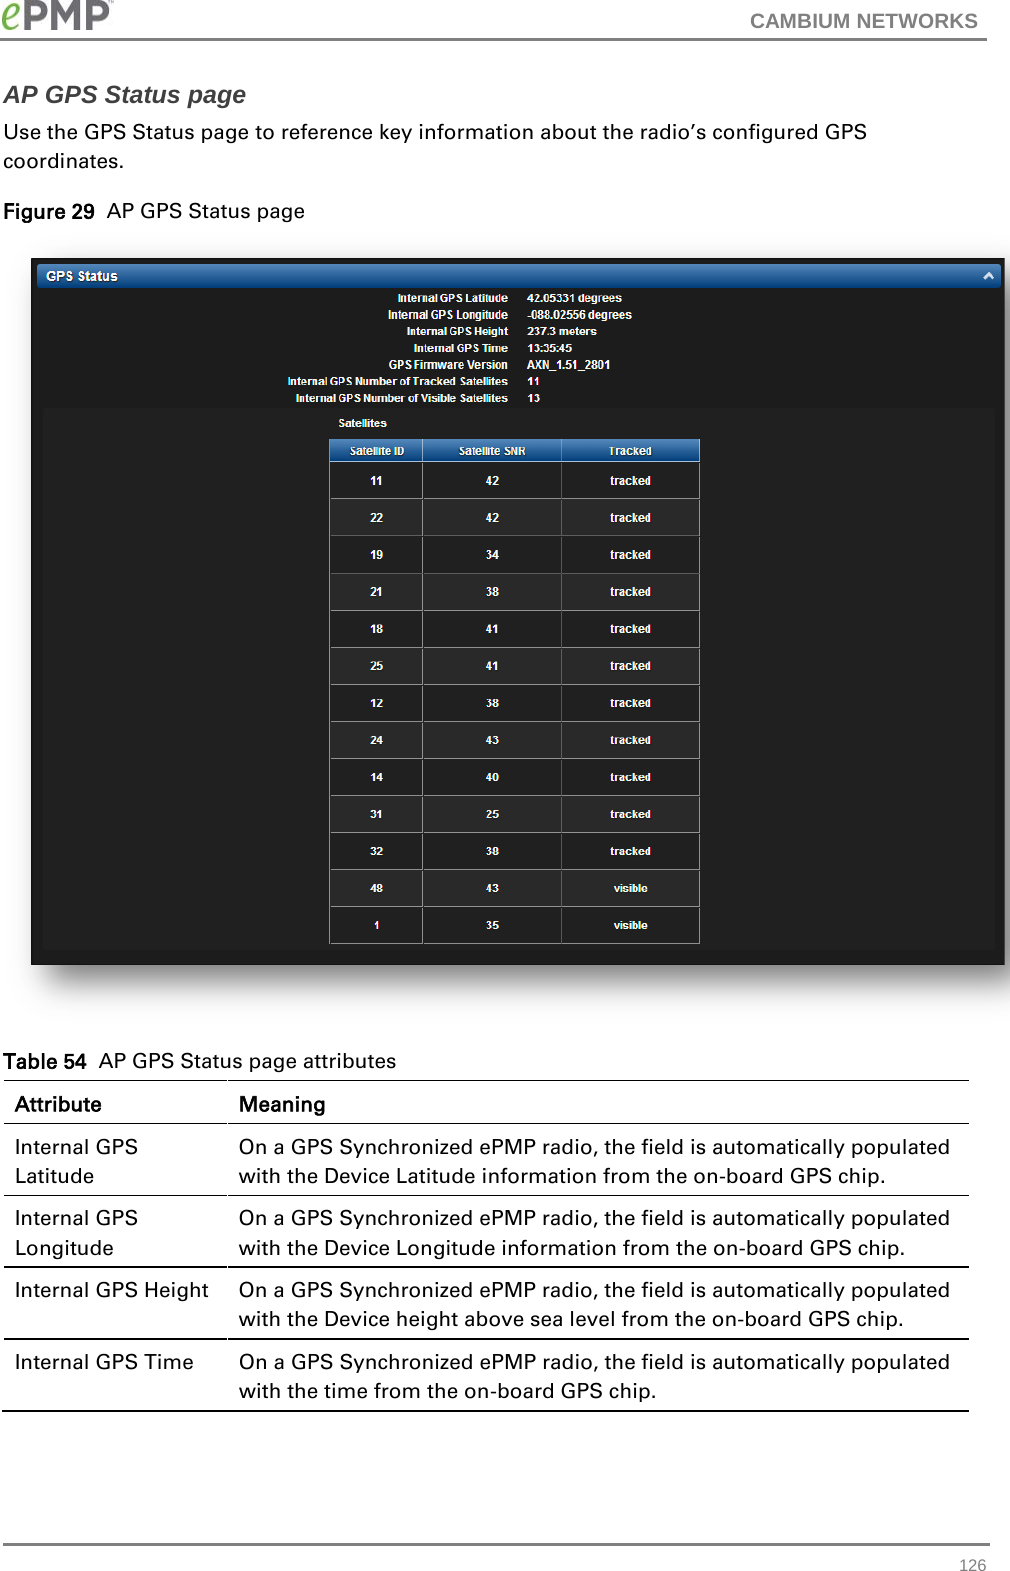 CAMBIUM NETWORKS  AP GPS Status page Use the GPS Status page to reference key information about the radio’s configured GPS coordinates. Figure 29  AP GPS Status page  Table 54  AP GPS Status page attributes Attribute Meaning Internal GPS Latitude On a GPS Synchronized ePMP radio, the field is automatically populated with the Device Latitude information from the on-board GPS chip. Internal GPS Longitude On a GPS Synchronized ePMP radio, the field is automatically populated with the Device Longitude information from the on-board GPS chip. Internal GPS Height On a GPS Synchronized ePMP radio, the field is automatically populated with the Device height above sea level from the on-board GPS chip. Internal GPS Time On a GPS Synchronized ePMP radio, the field is automatically populated with the time from the on-board GPS chip.  126 